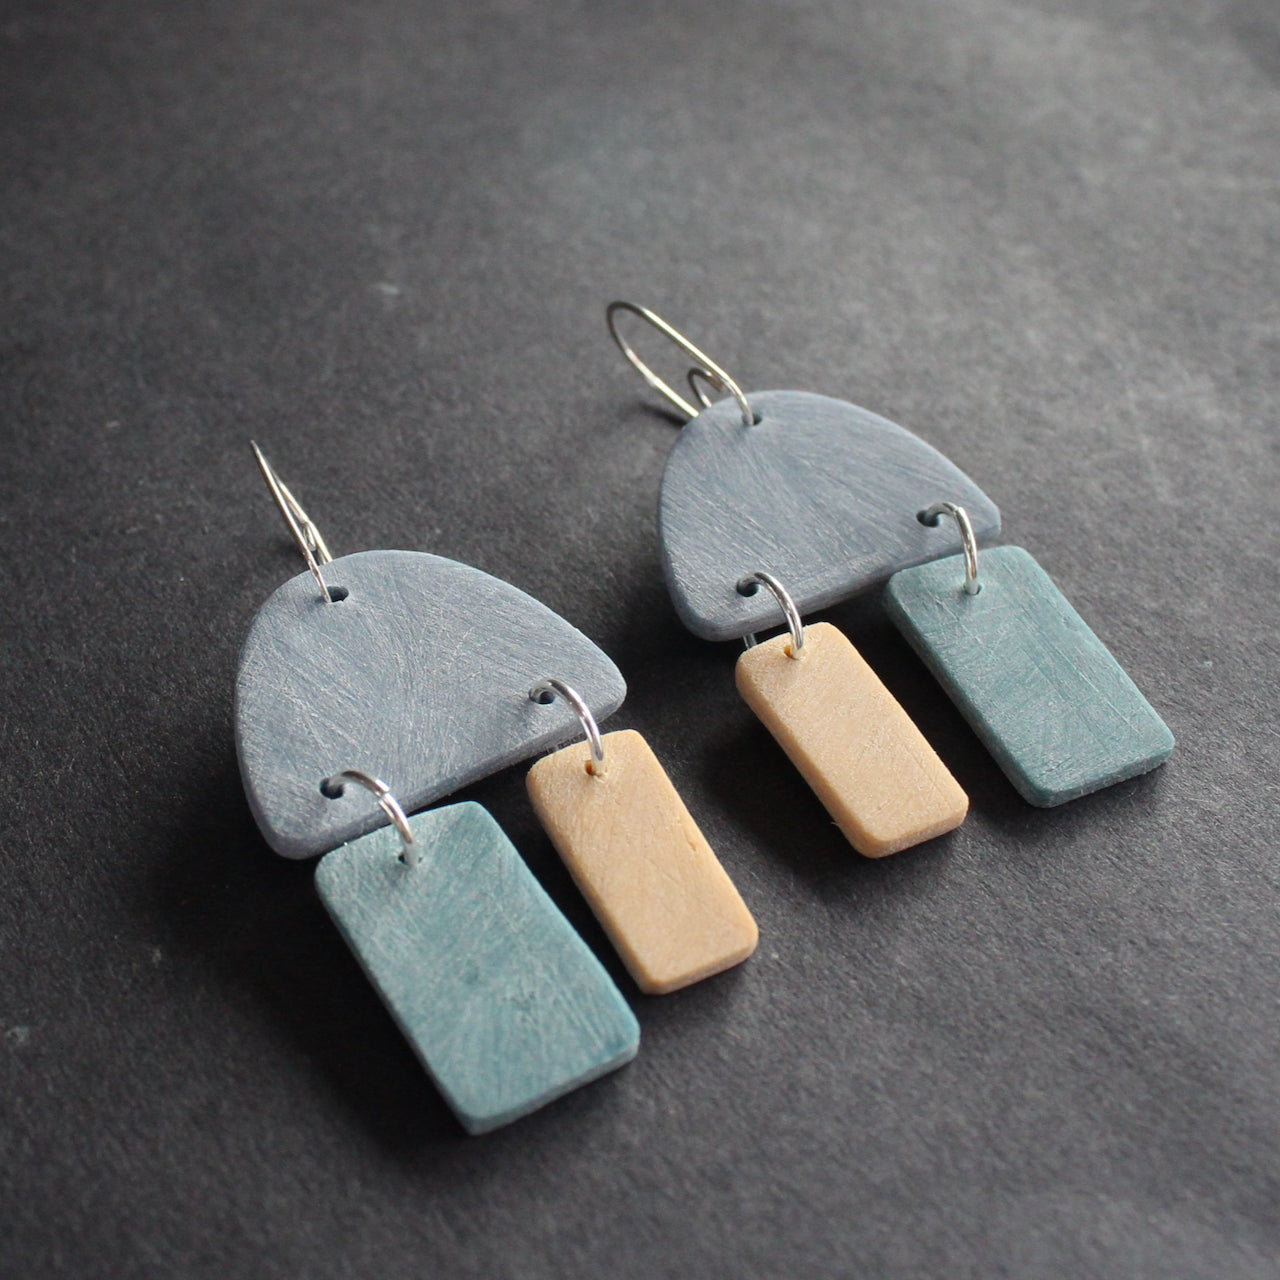  earrings in blue, turquoise and pale yellow by jewellery designer Clare Lloyd 